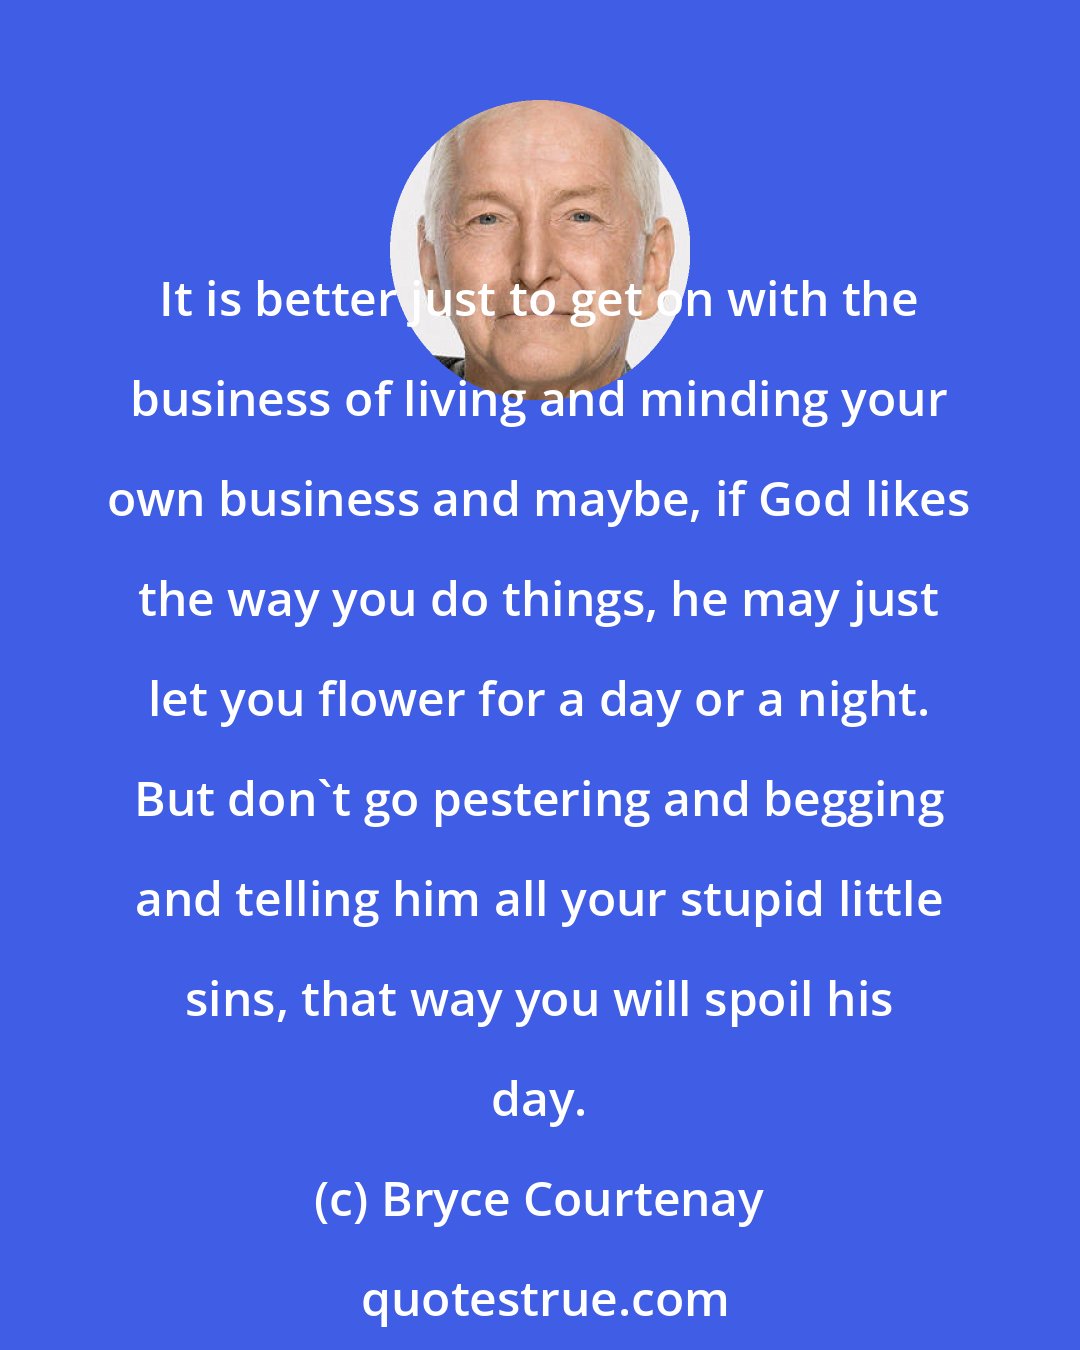 Bryce Courtenay: It is better just to get on with the business of living and minding your own business and maybe, if God likes the way you do things, he may just let you flower for a day or a night. But don't go pestering and begging and telling him all your stupid little sins, that way you will spoil his day.